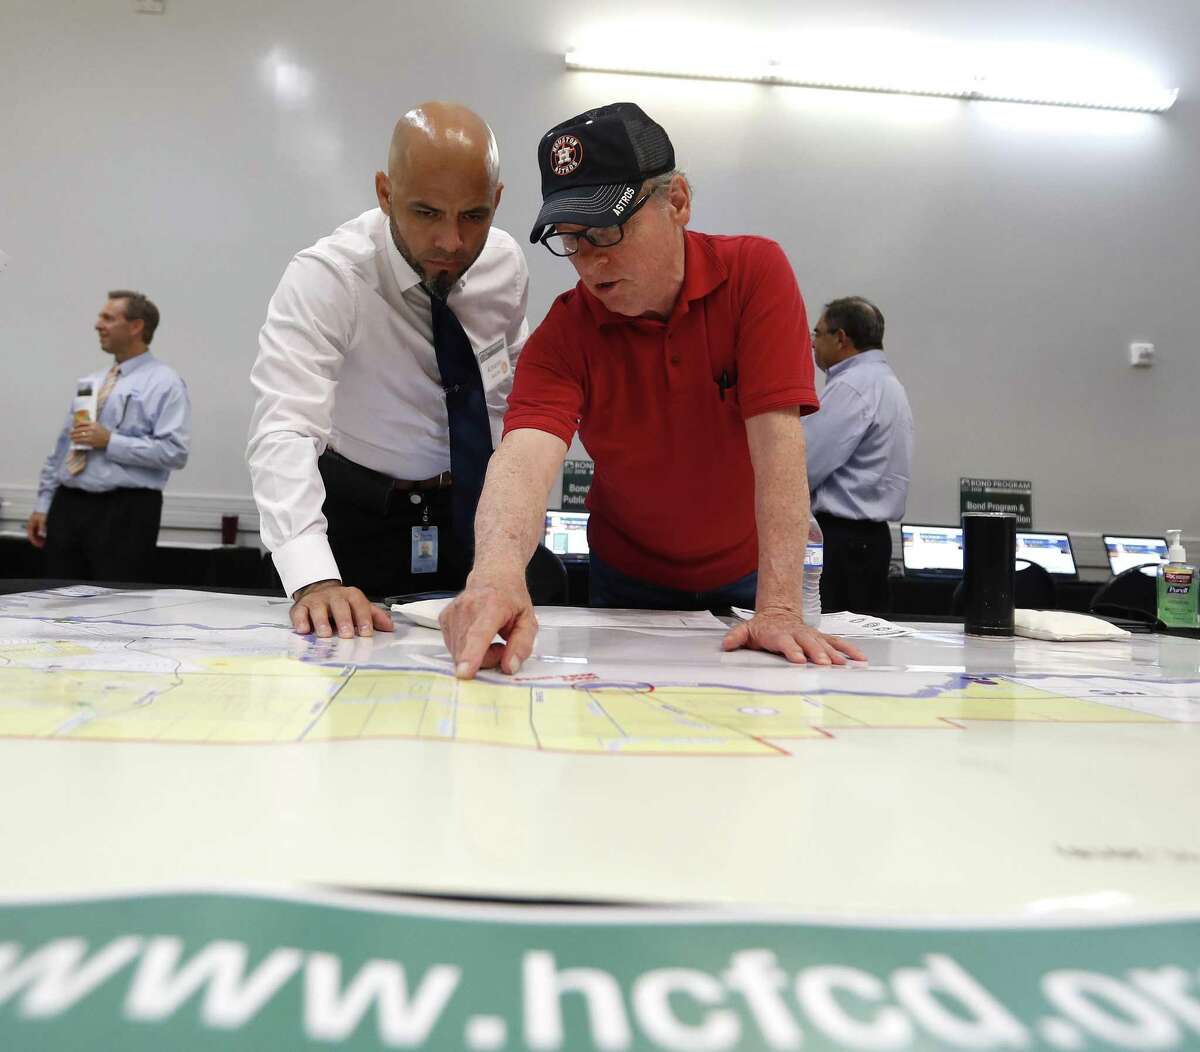 Armando Sanchez, left, helps Don Corolla as they point to a spot on a map as Harris County held one in a series of public meetings on the $2.5 billion flood bond proposal at the El Franco Lee Community Center, Tuesday, July 17, 2018, in Houston. ( Karen Warren / Houston Chronicle )